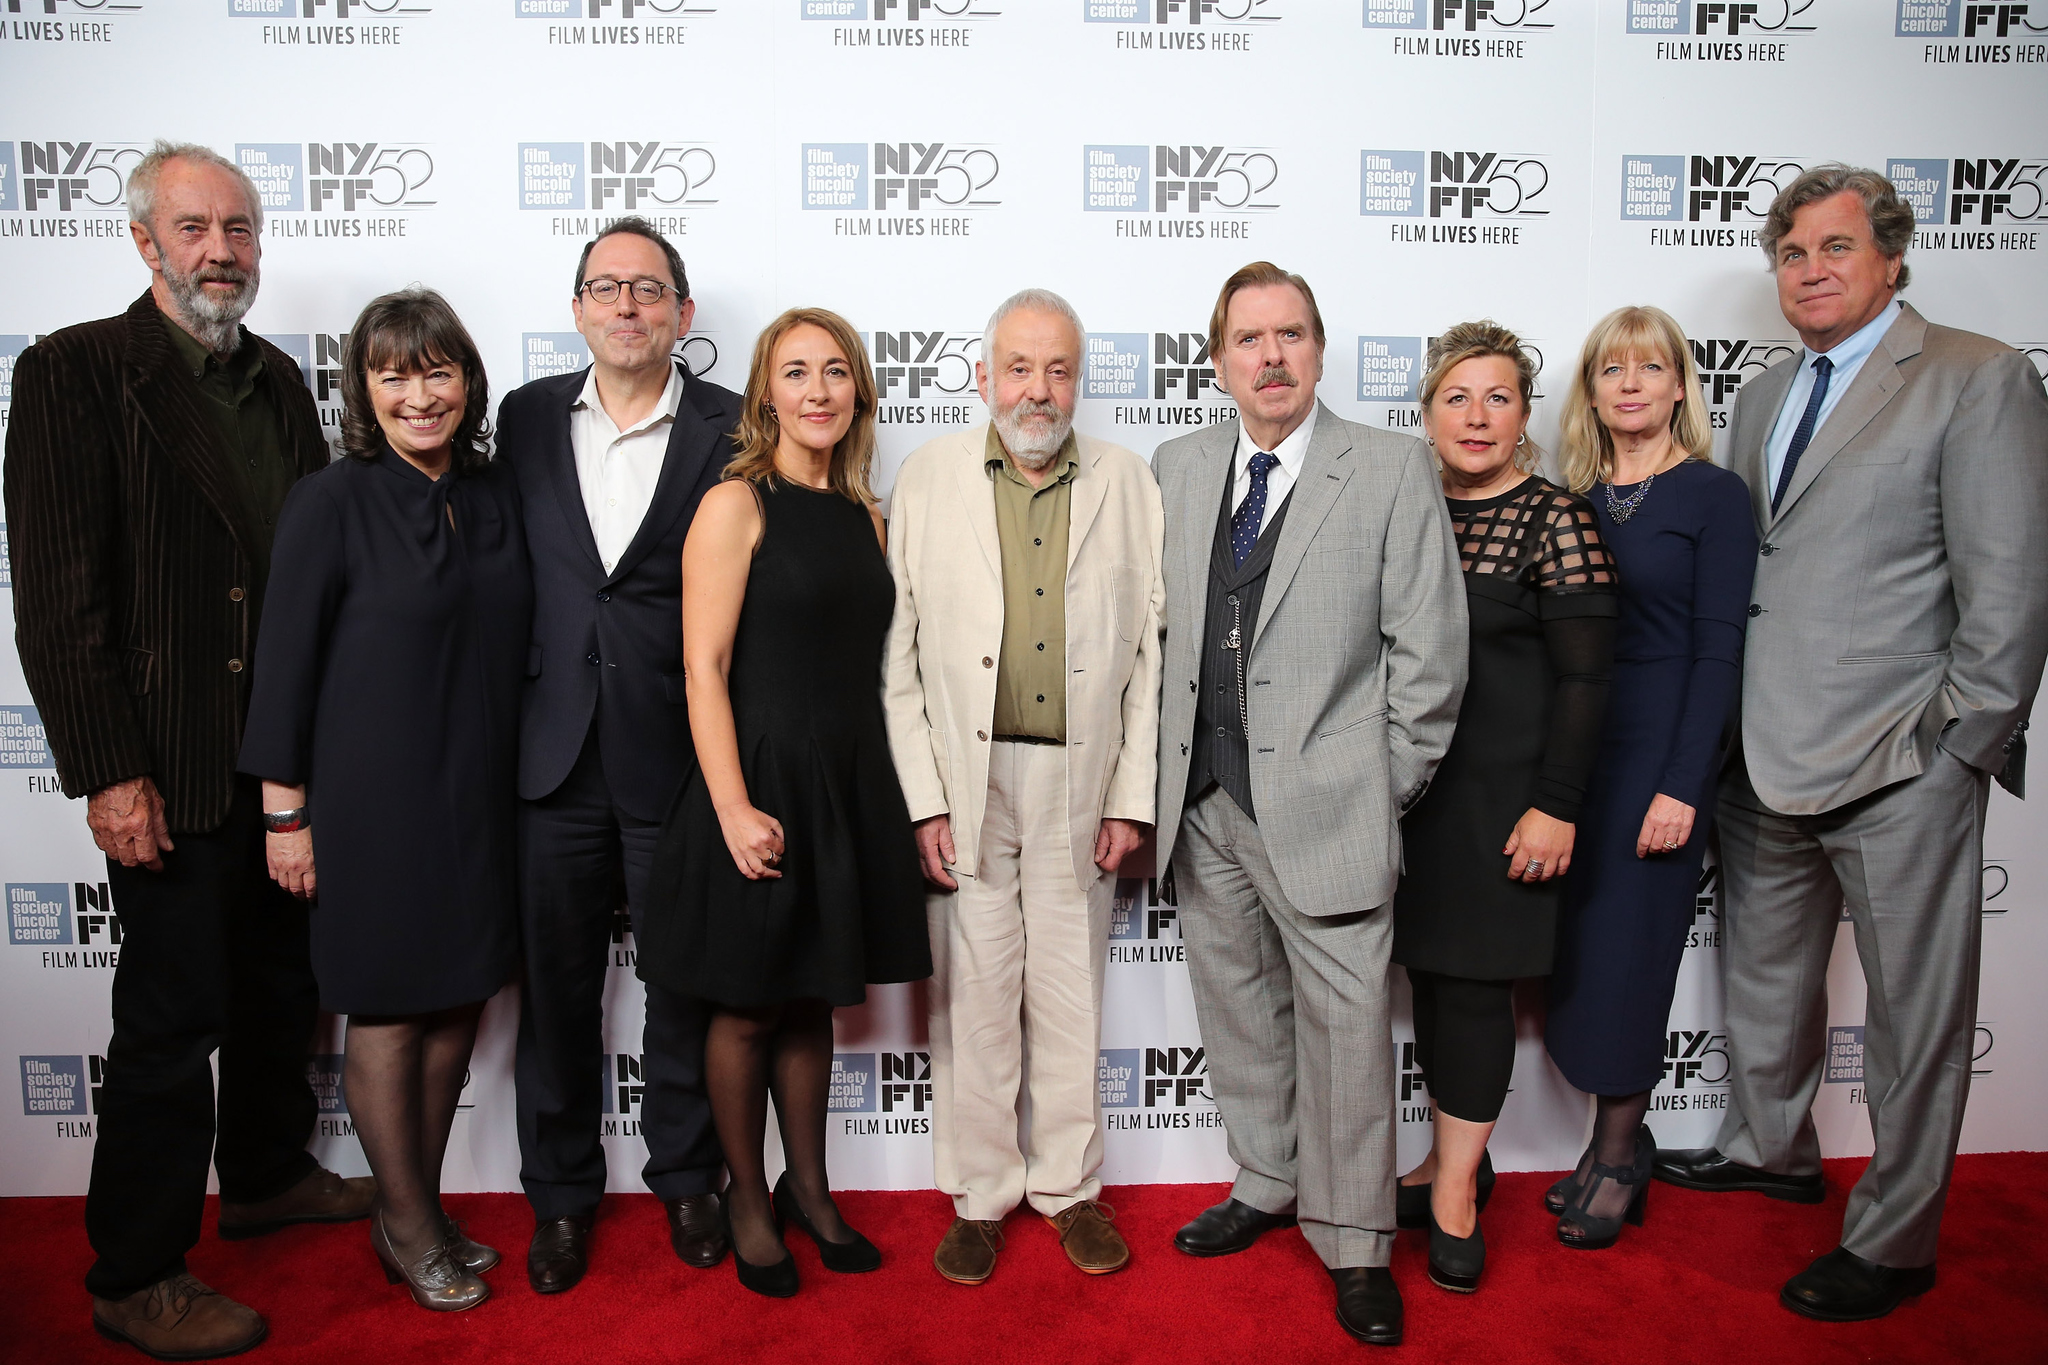 Timothy Spall, Mike Leigh, Dick Pope, Dorothy Atkinson, Marion Bailey, Suzie Davies, Georgina Lowe, Michael Barker and Tom Bernard at event of Mr. Turner (2014)